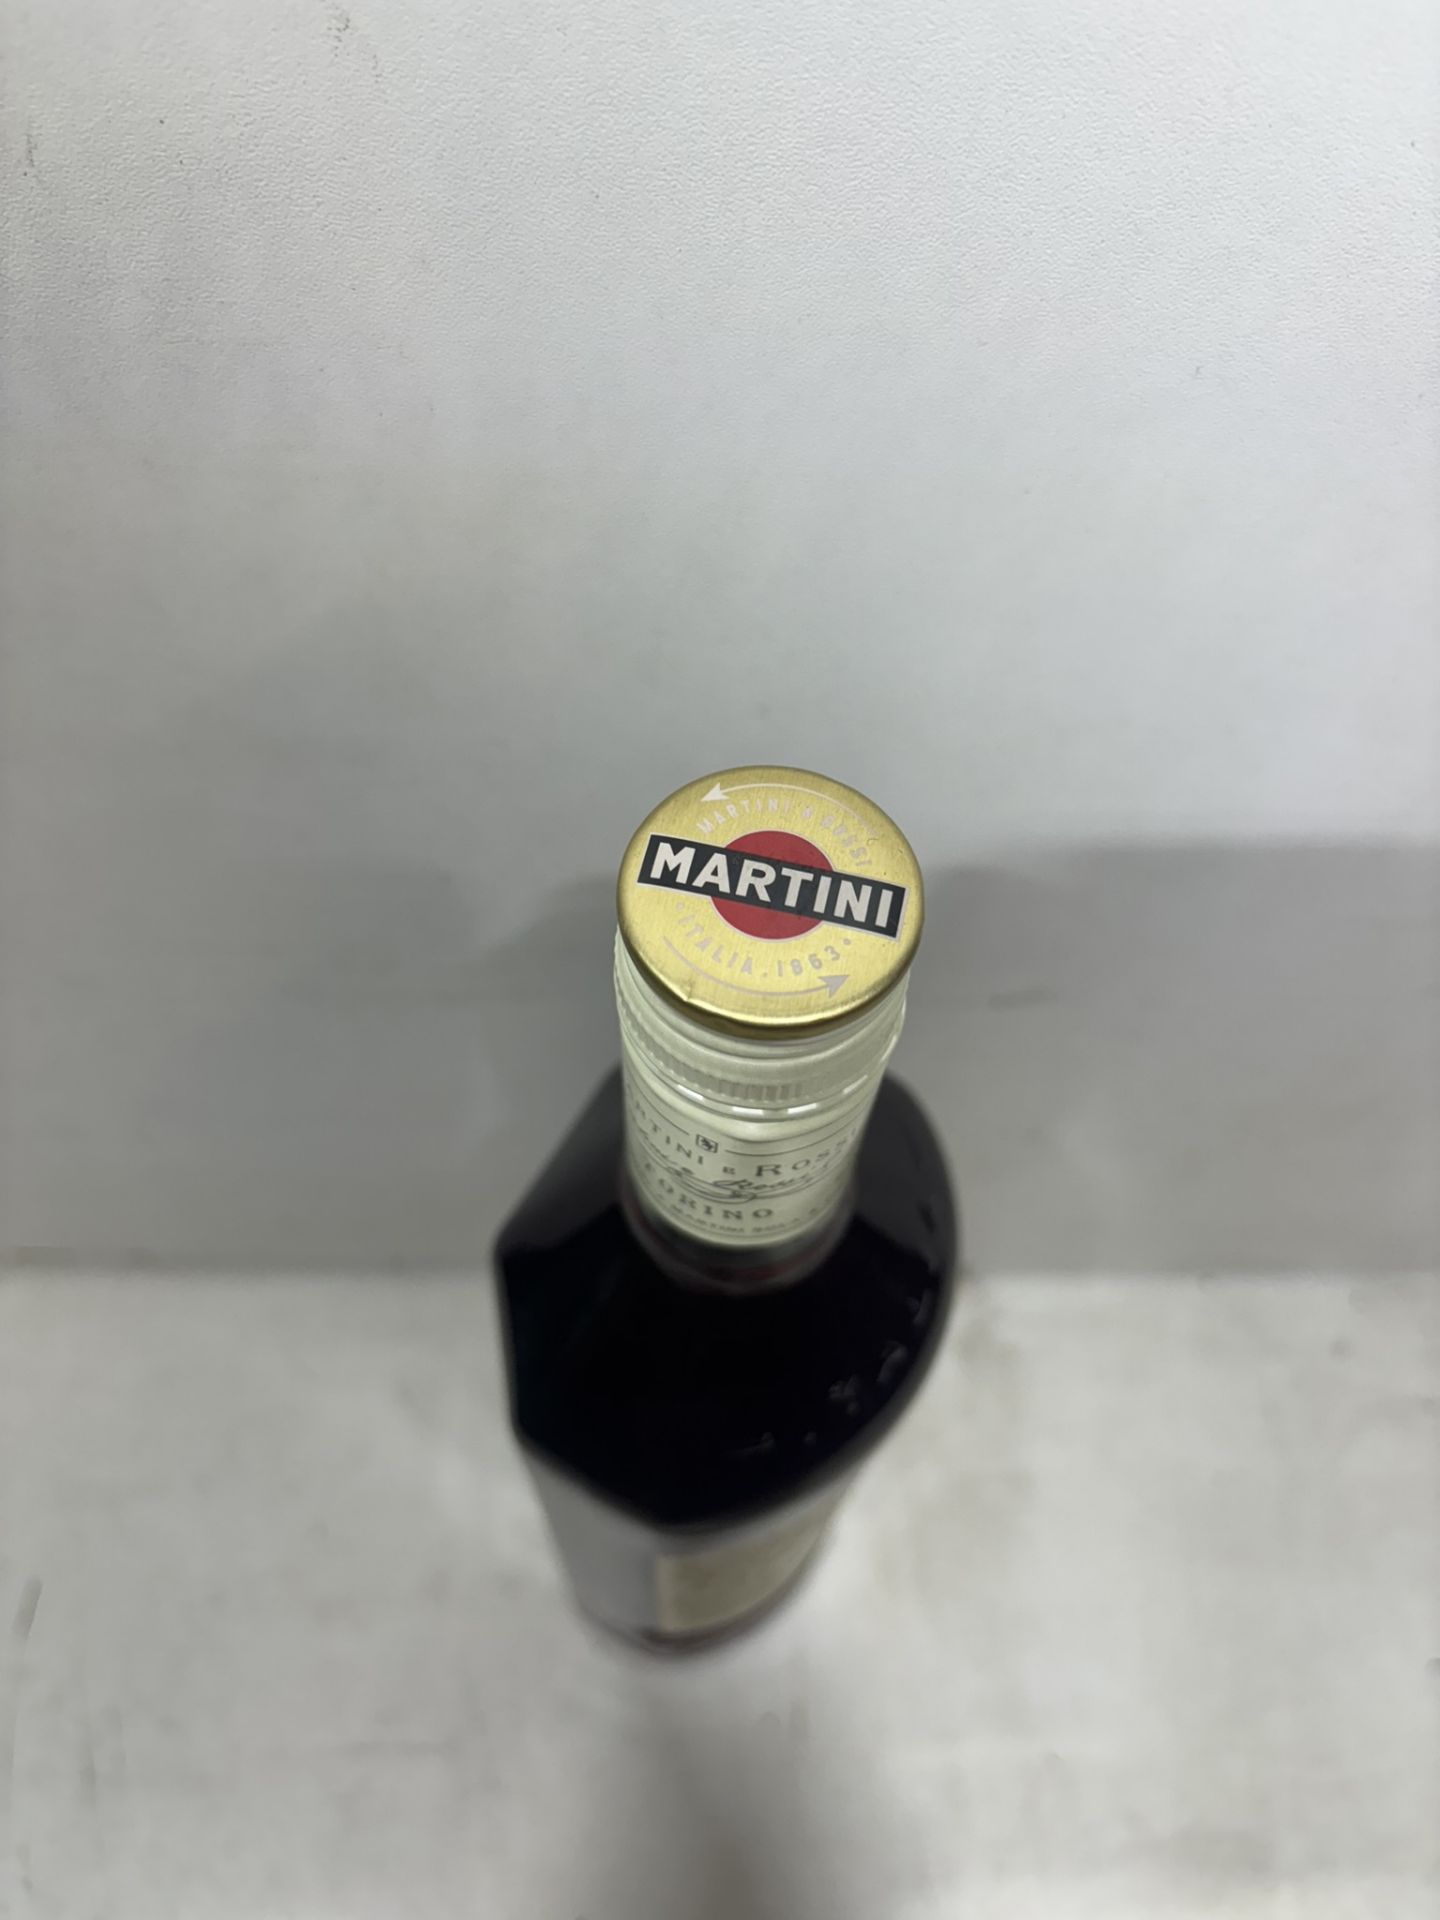 6 X Bottles Of Martini Riserva Speciale 1872 Bitter 70Cl - Image 5 of 5